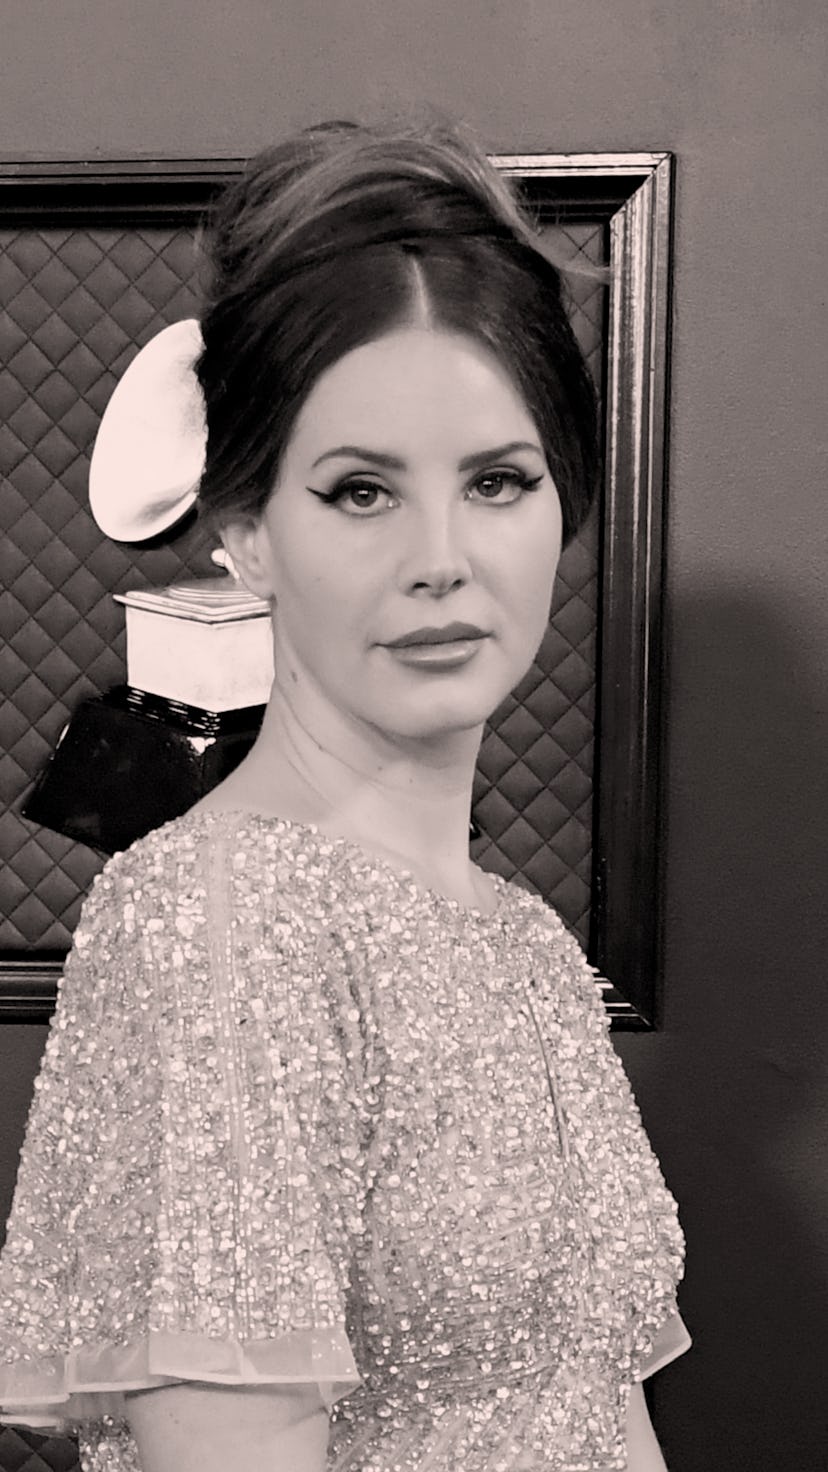 LOS ANGELES, CALIFORNIA - JANUARY 26: Lana Del Rey attends the 62nd Annual GRAMMY Awards at Staples ...